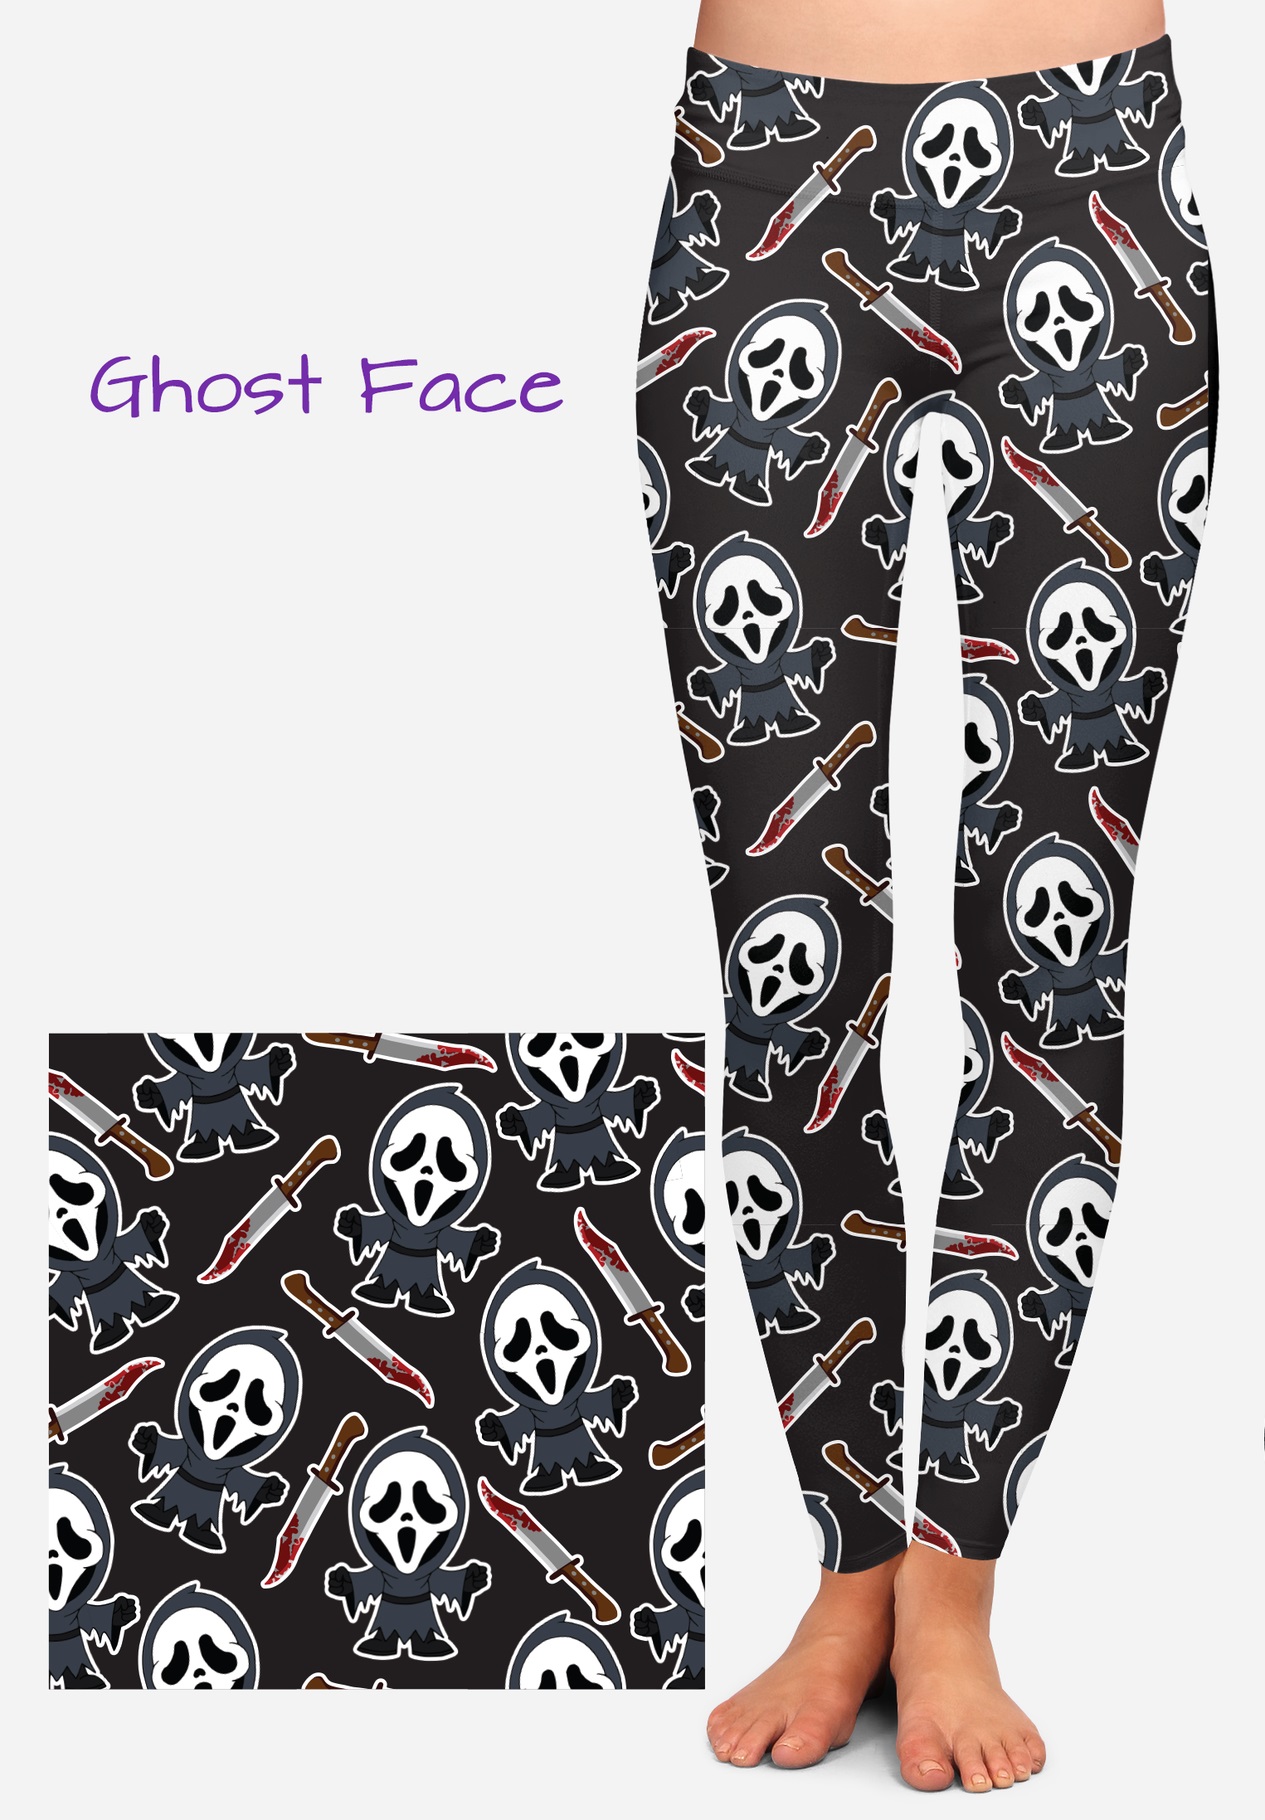 Howl-o-Scream Gates Leggings for Sale by APOFphotography